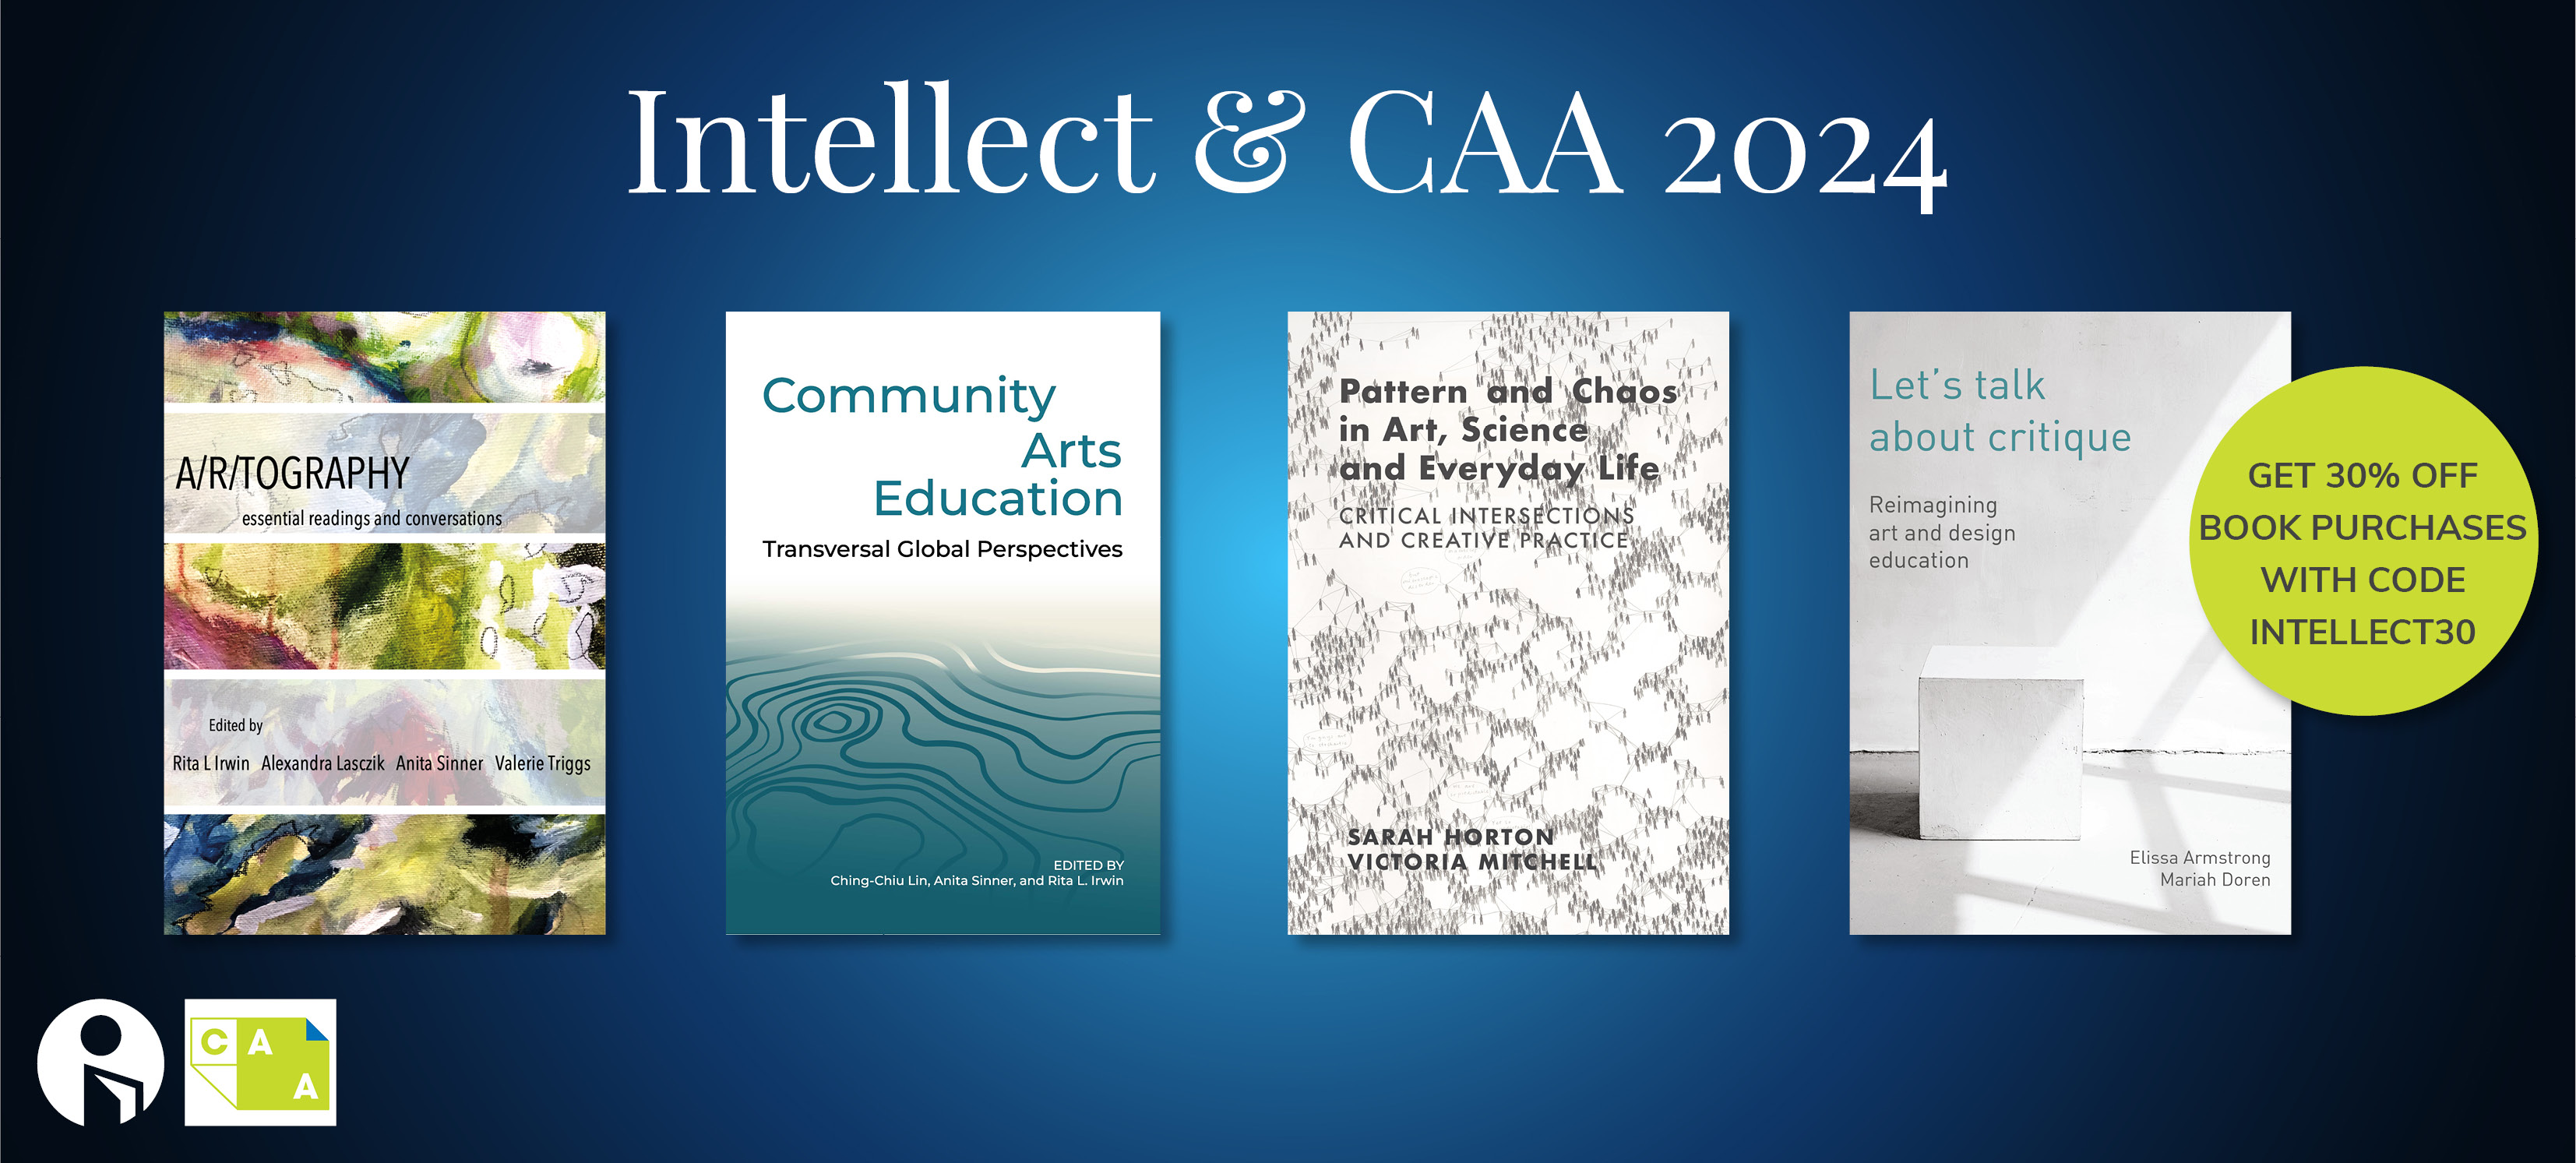 CAA 2024 Conference Banner